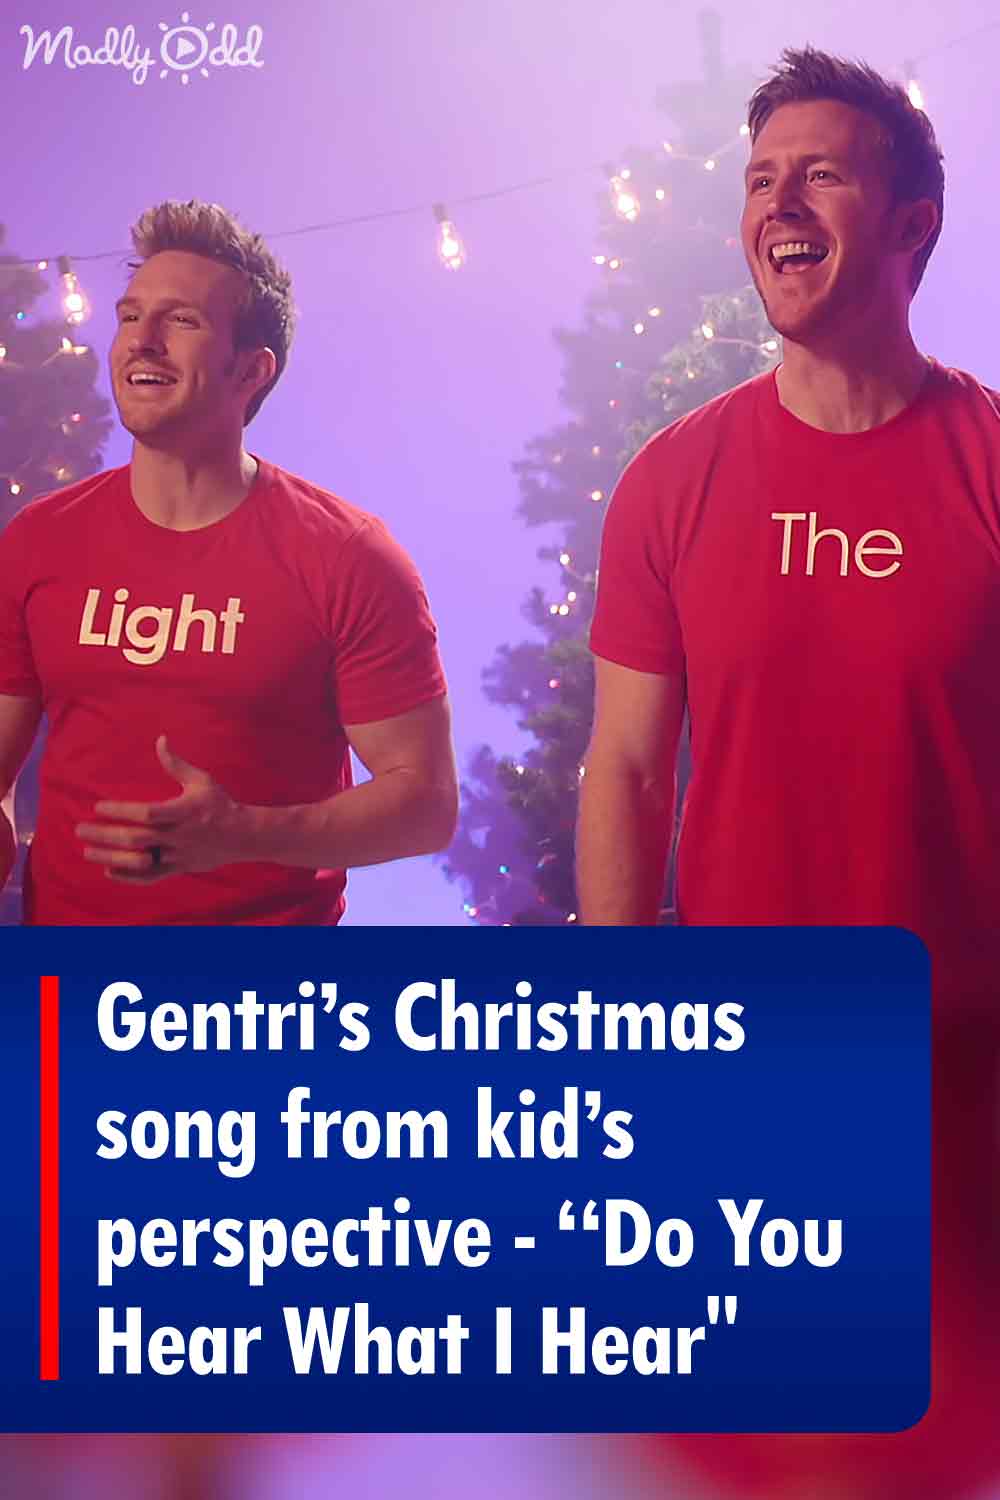 Gentri’s Christmas song from kid’s perspective - “Do You Hear What I Hear\